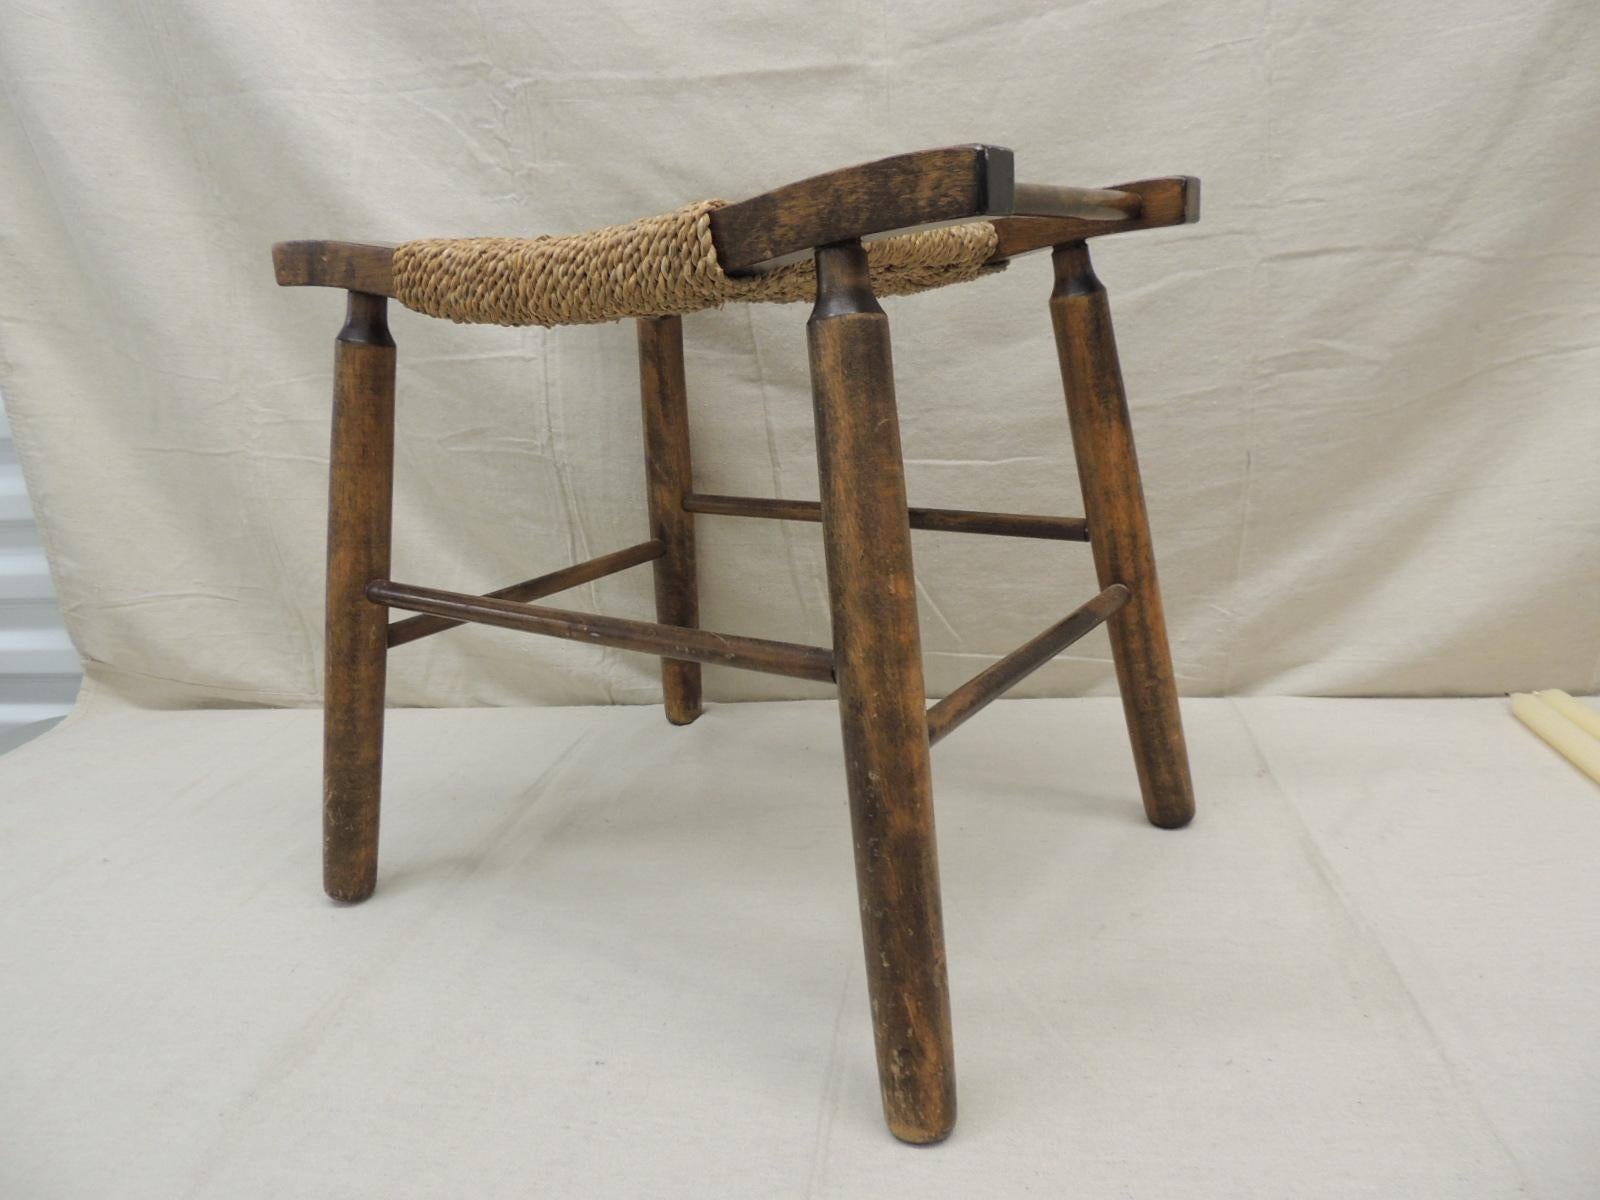 Vintage Mid-Century Modern stool with woven twine seat
round legs and stretchers. aka rush seat.
Size: 19.5